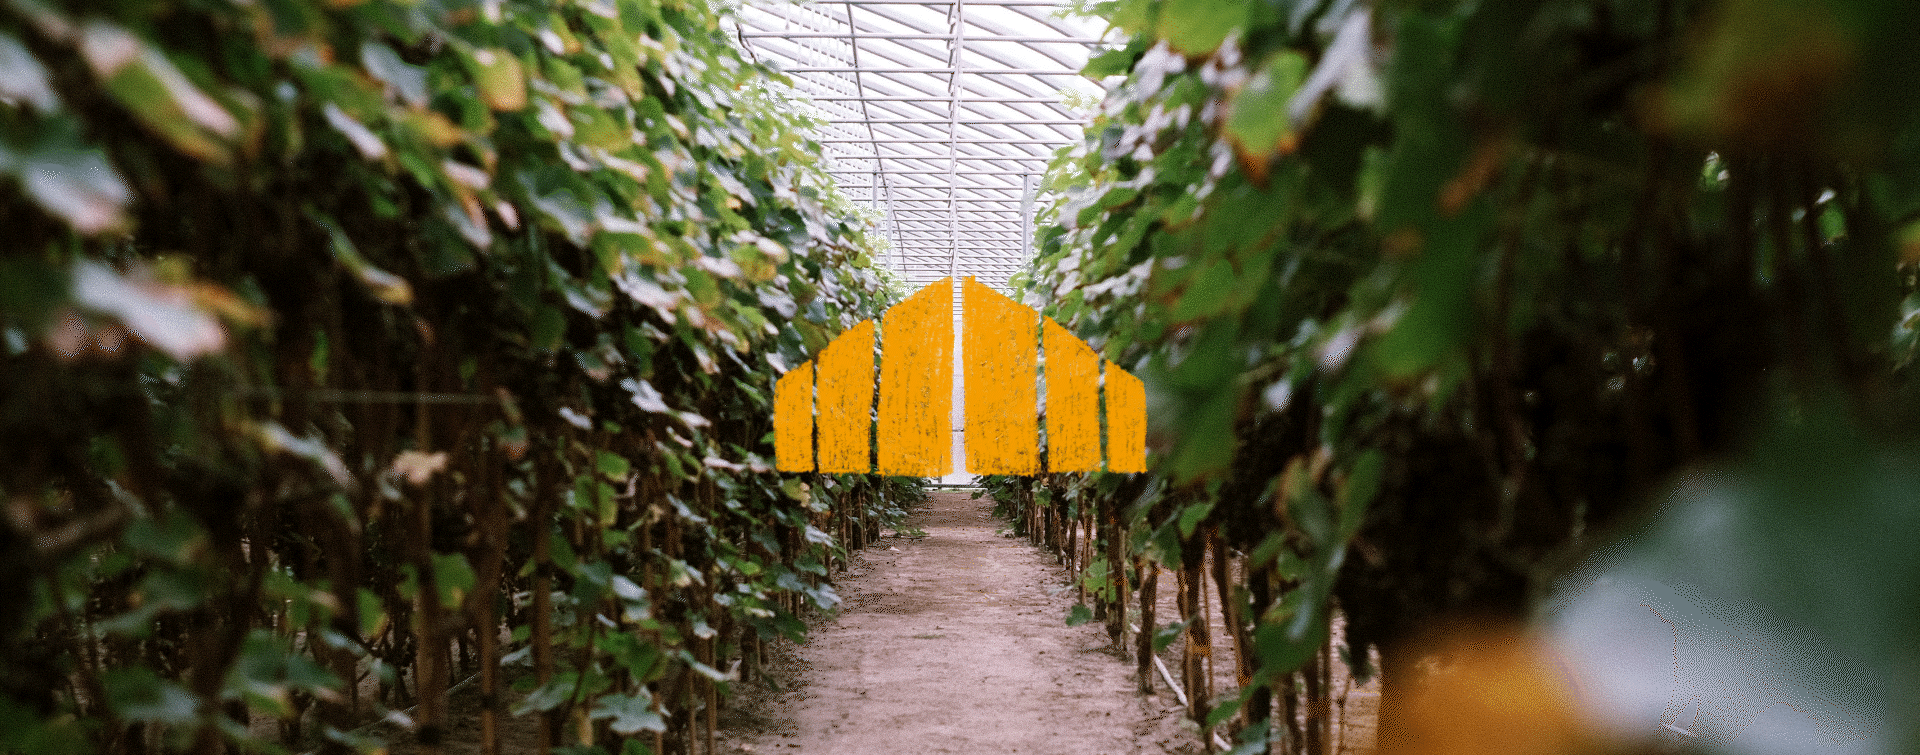 Mountain-shaped yellow graphic element over a picture of the vines